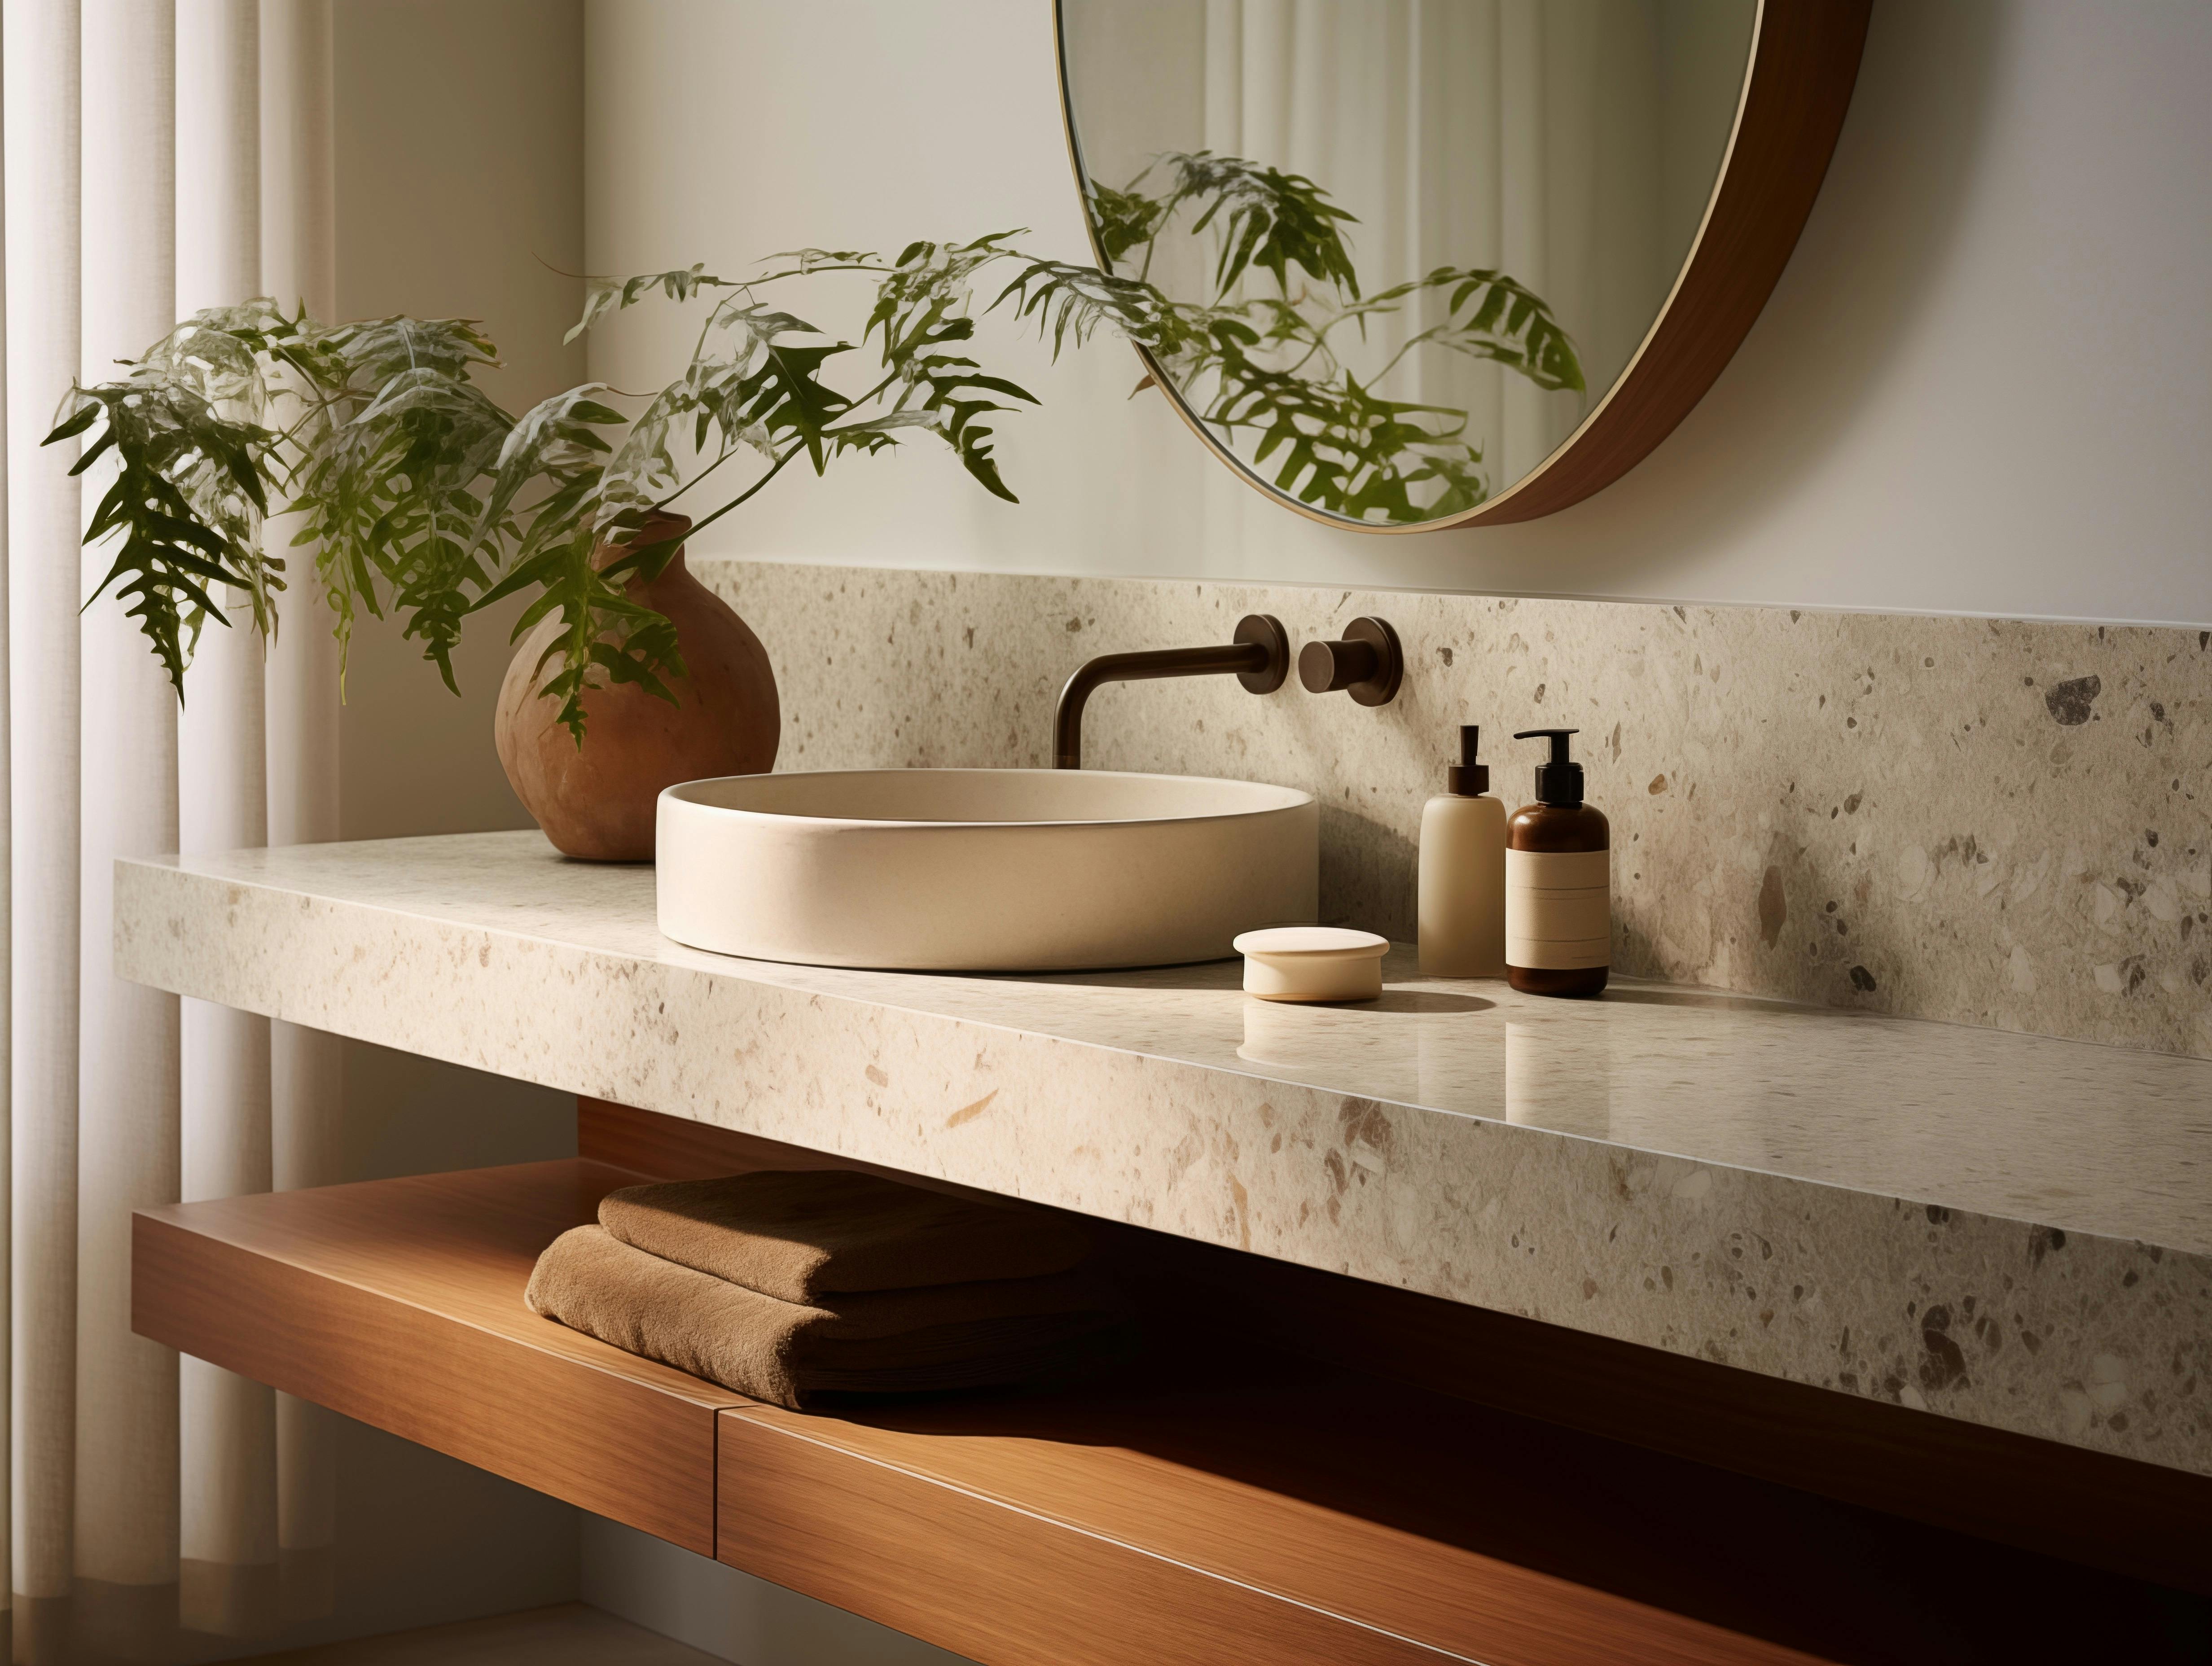 AI Visualization by Persimmon Design of Terrazzo surfaces in a Bathroom